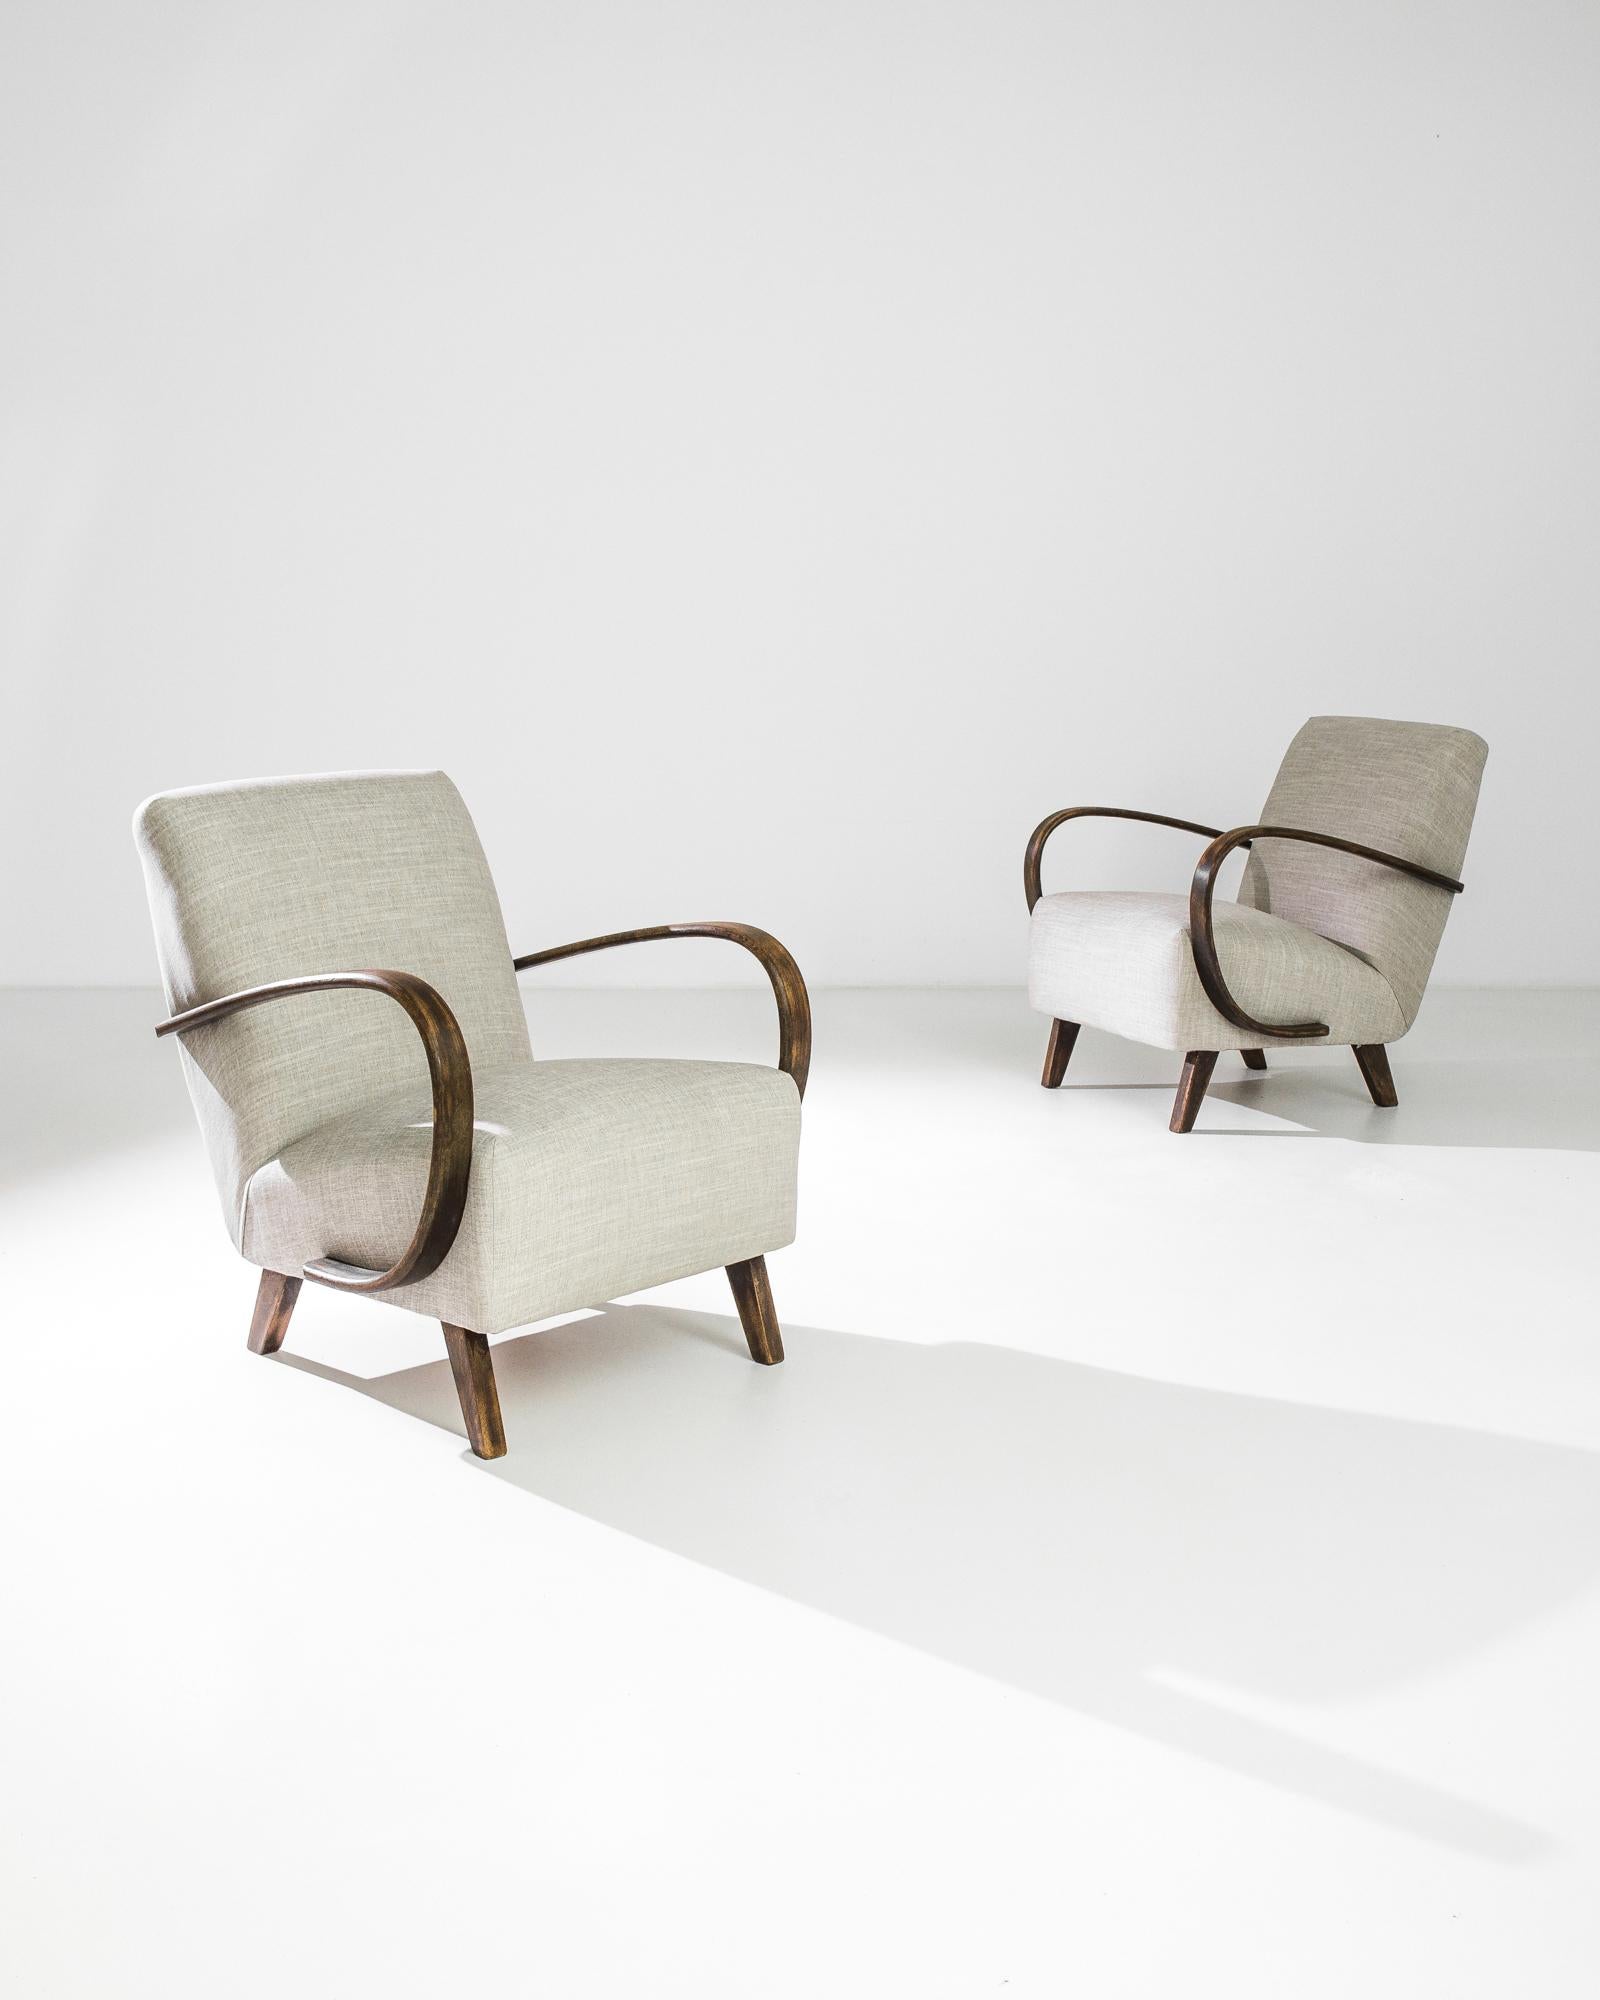 A pair of upholstered armchairs by Czech furniture designer J. Halabala. Made in the 1950s, the eye-catching silhouette and comfortable design has an enduring appeal. Influenced by Mid-Century Modern and Art Deco design, a deep upholstered seat upon